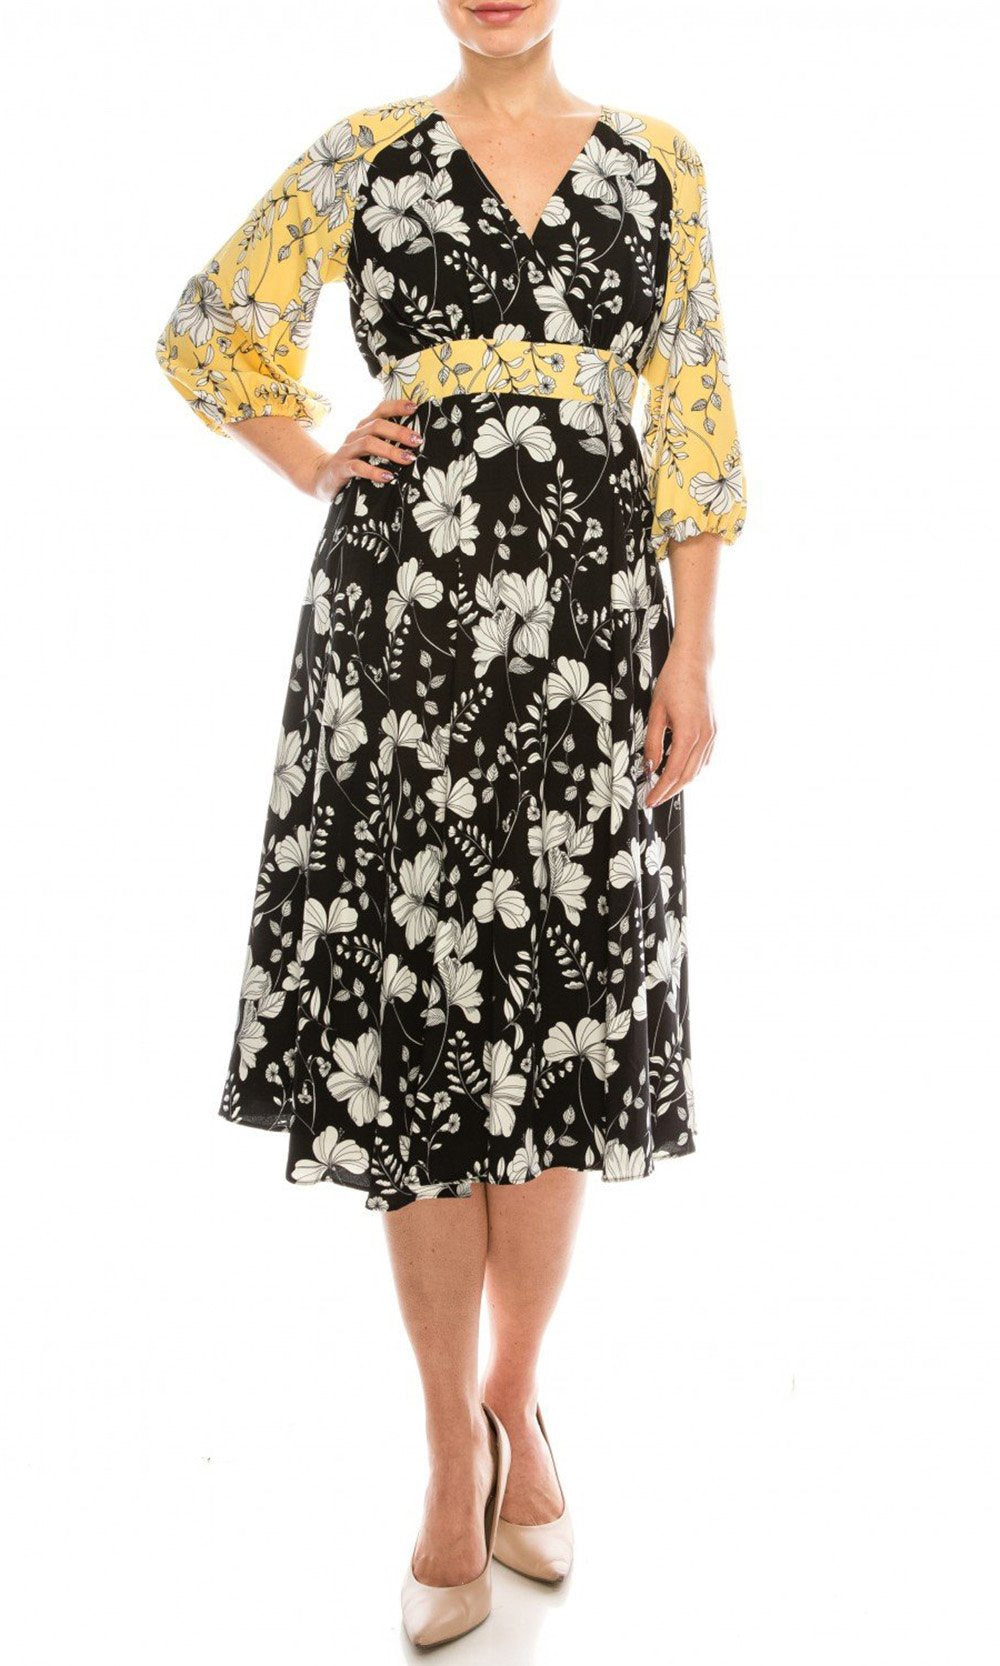 Gabby Skye - 91196MG Quarter Sleeve Floral Color Block A-Line Dress In Yellow and Black